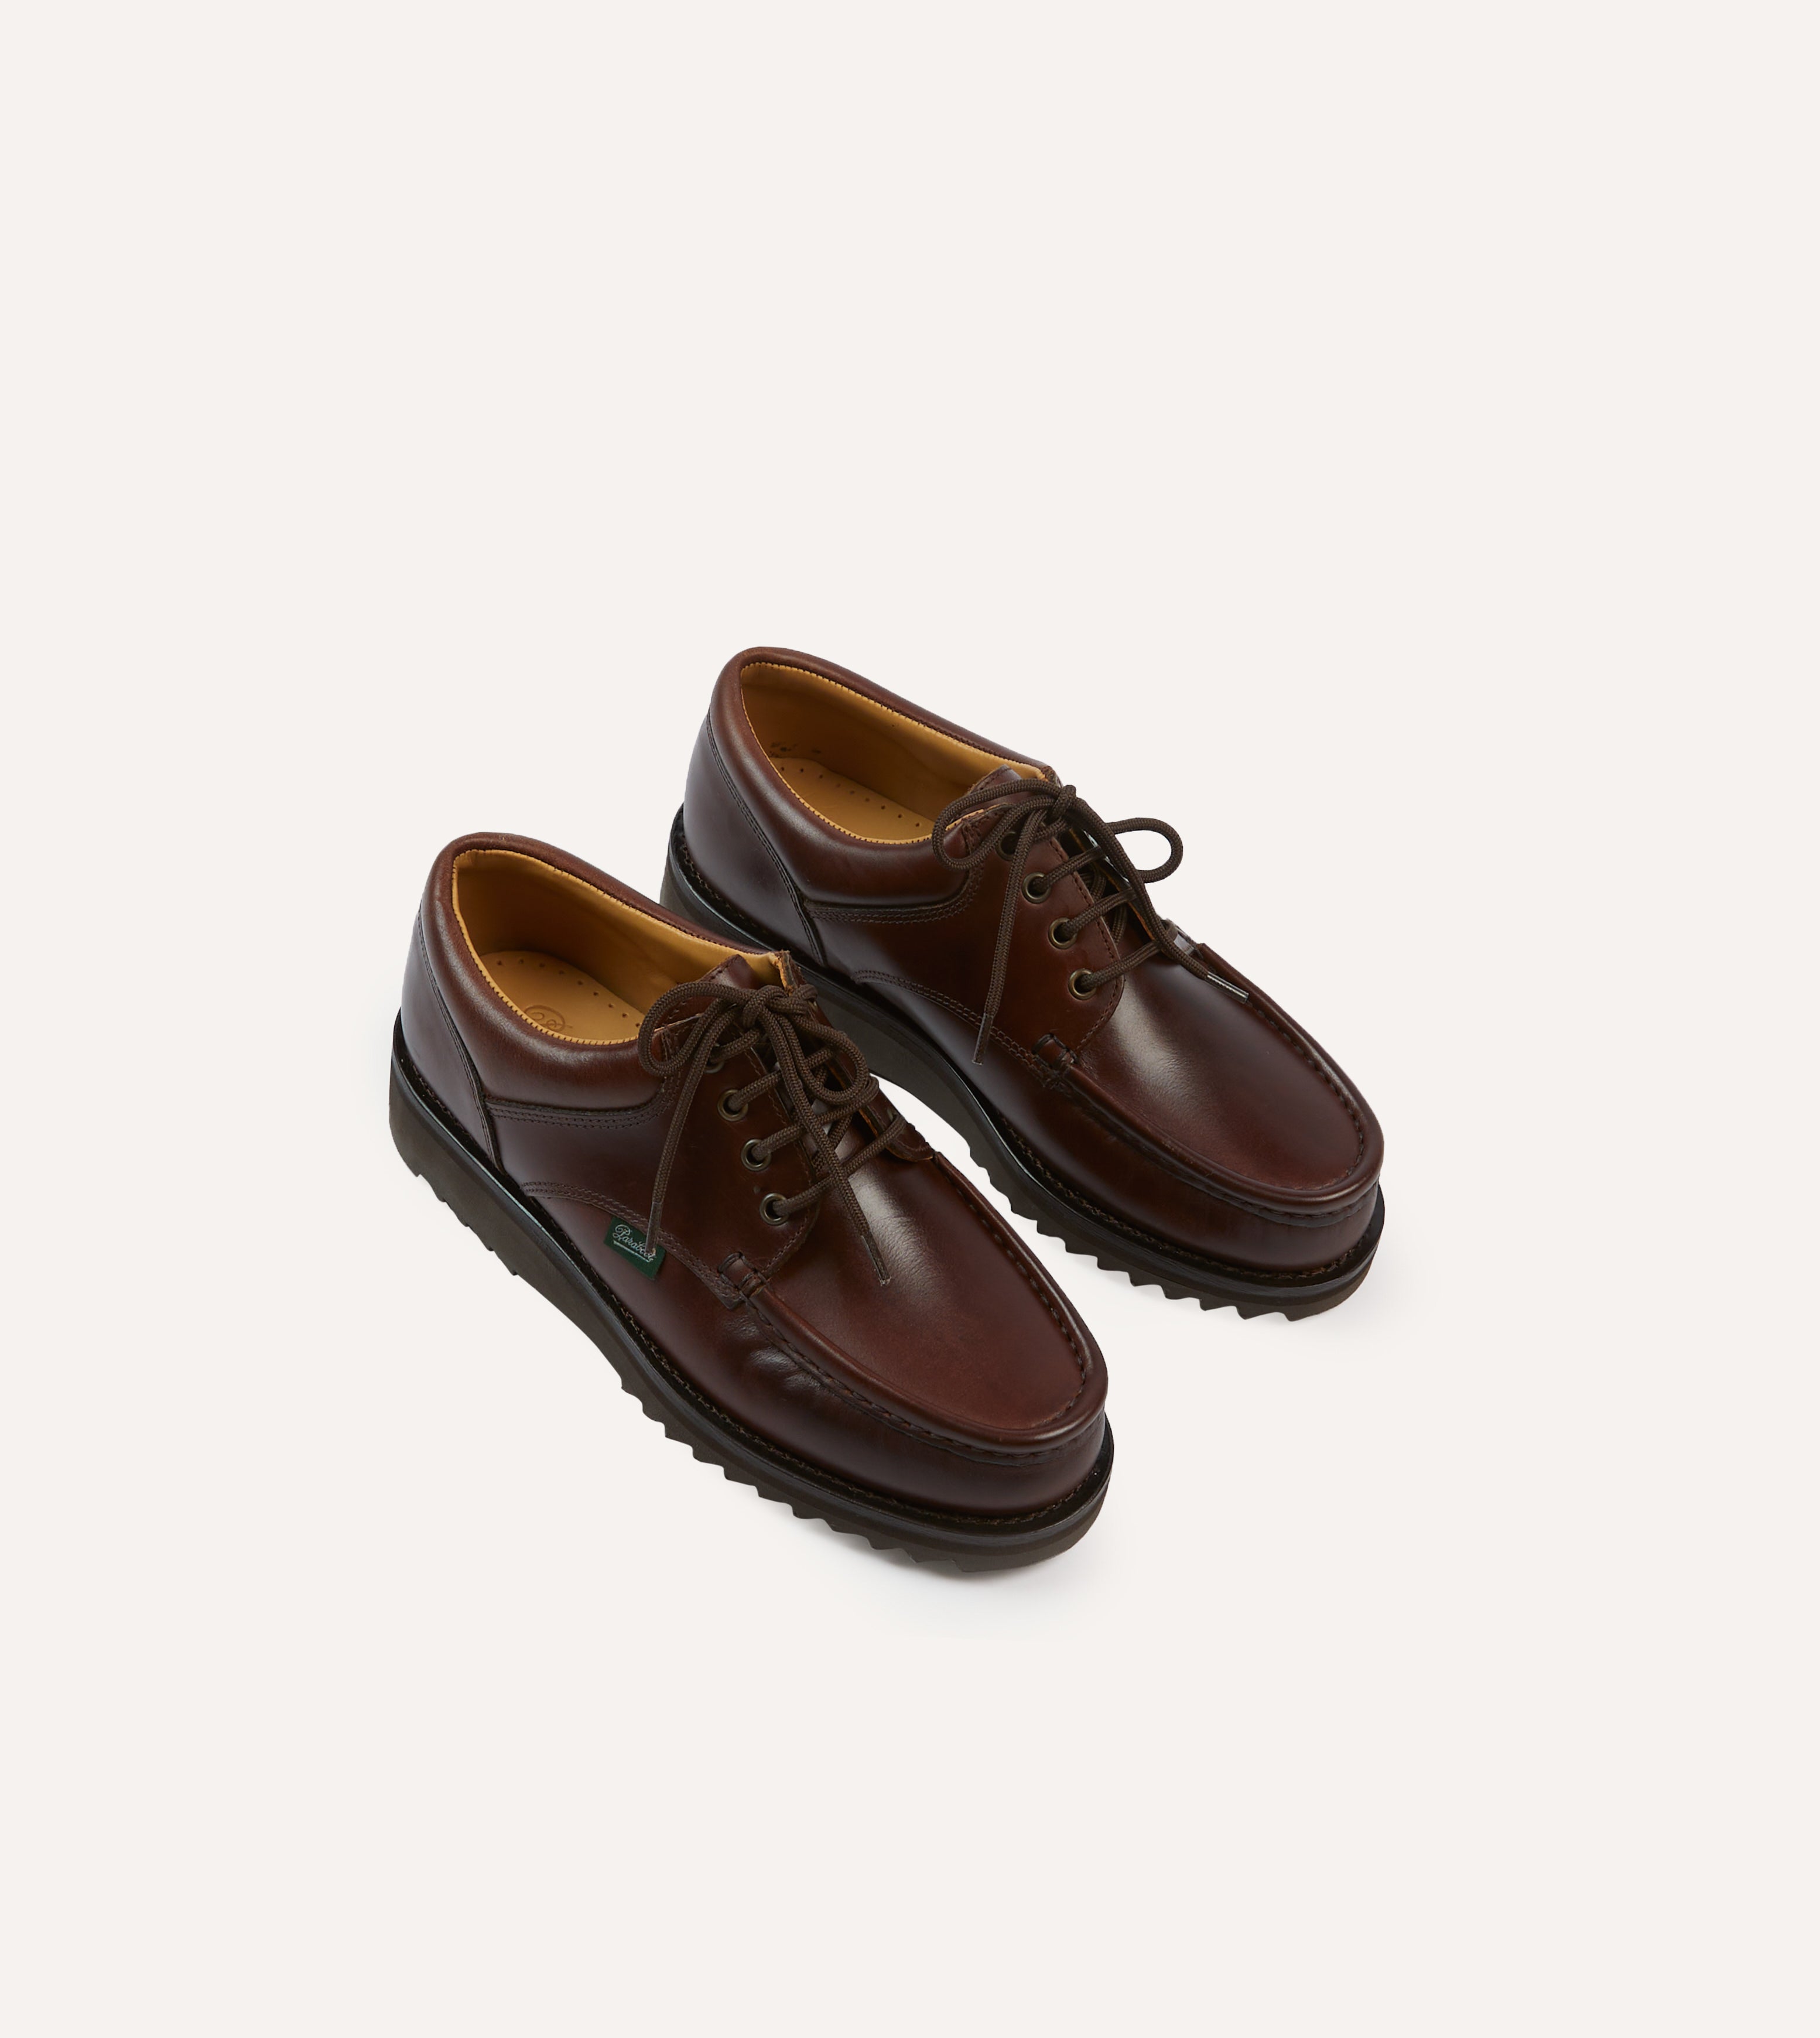 Paraboot Thiers Brown Calf Leather Derby Shoe – Drakes US